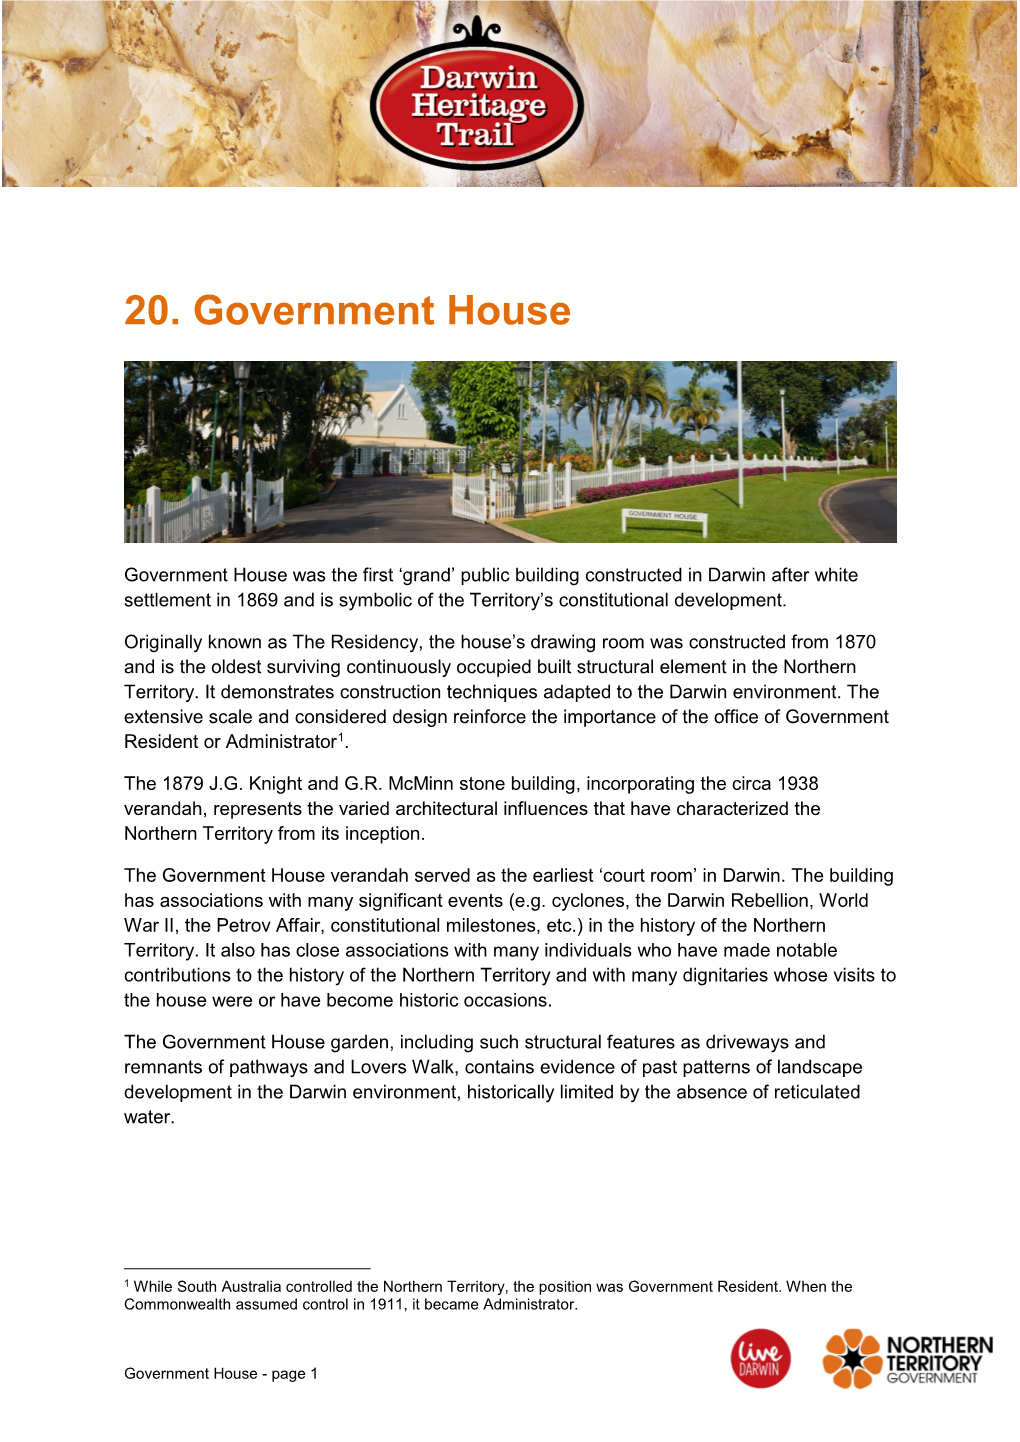 20. Government House